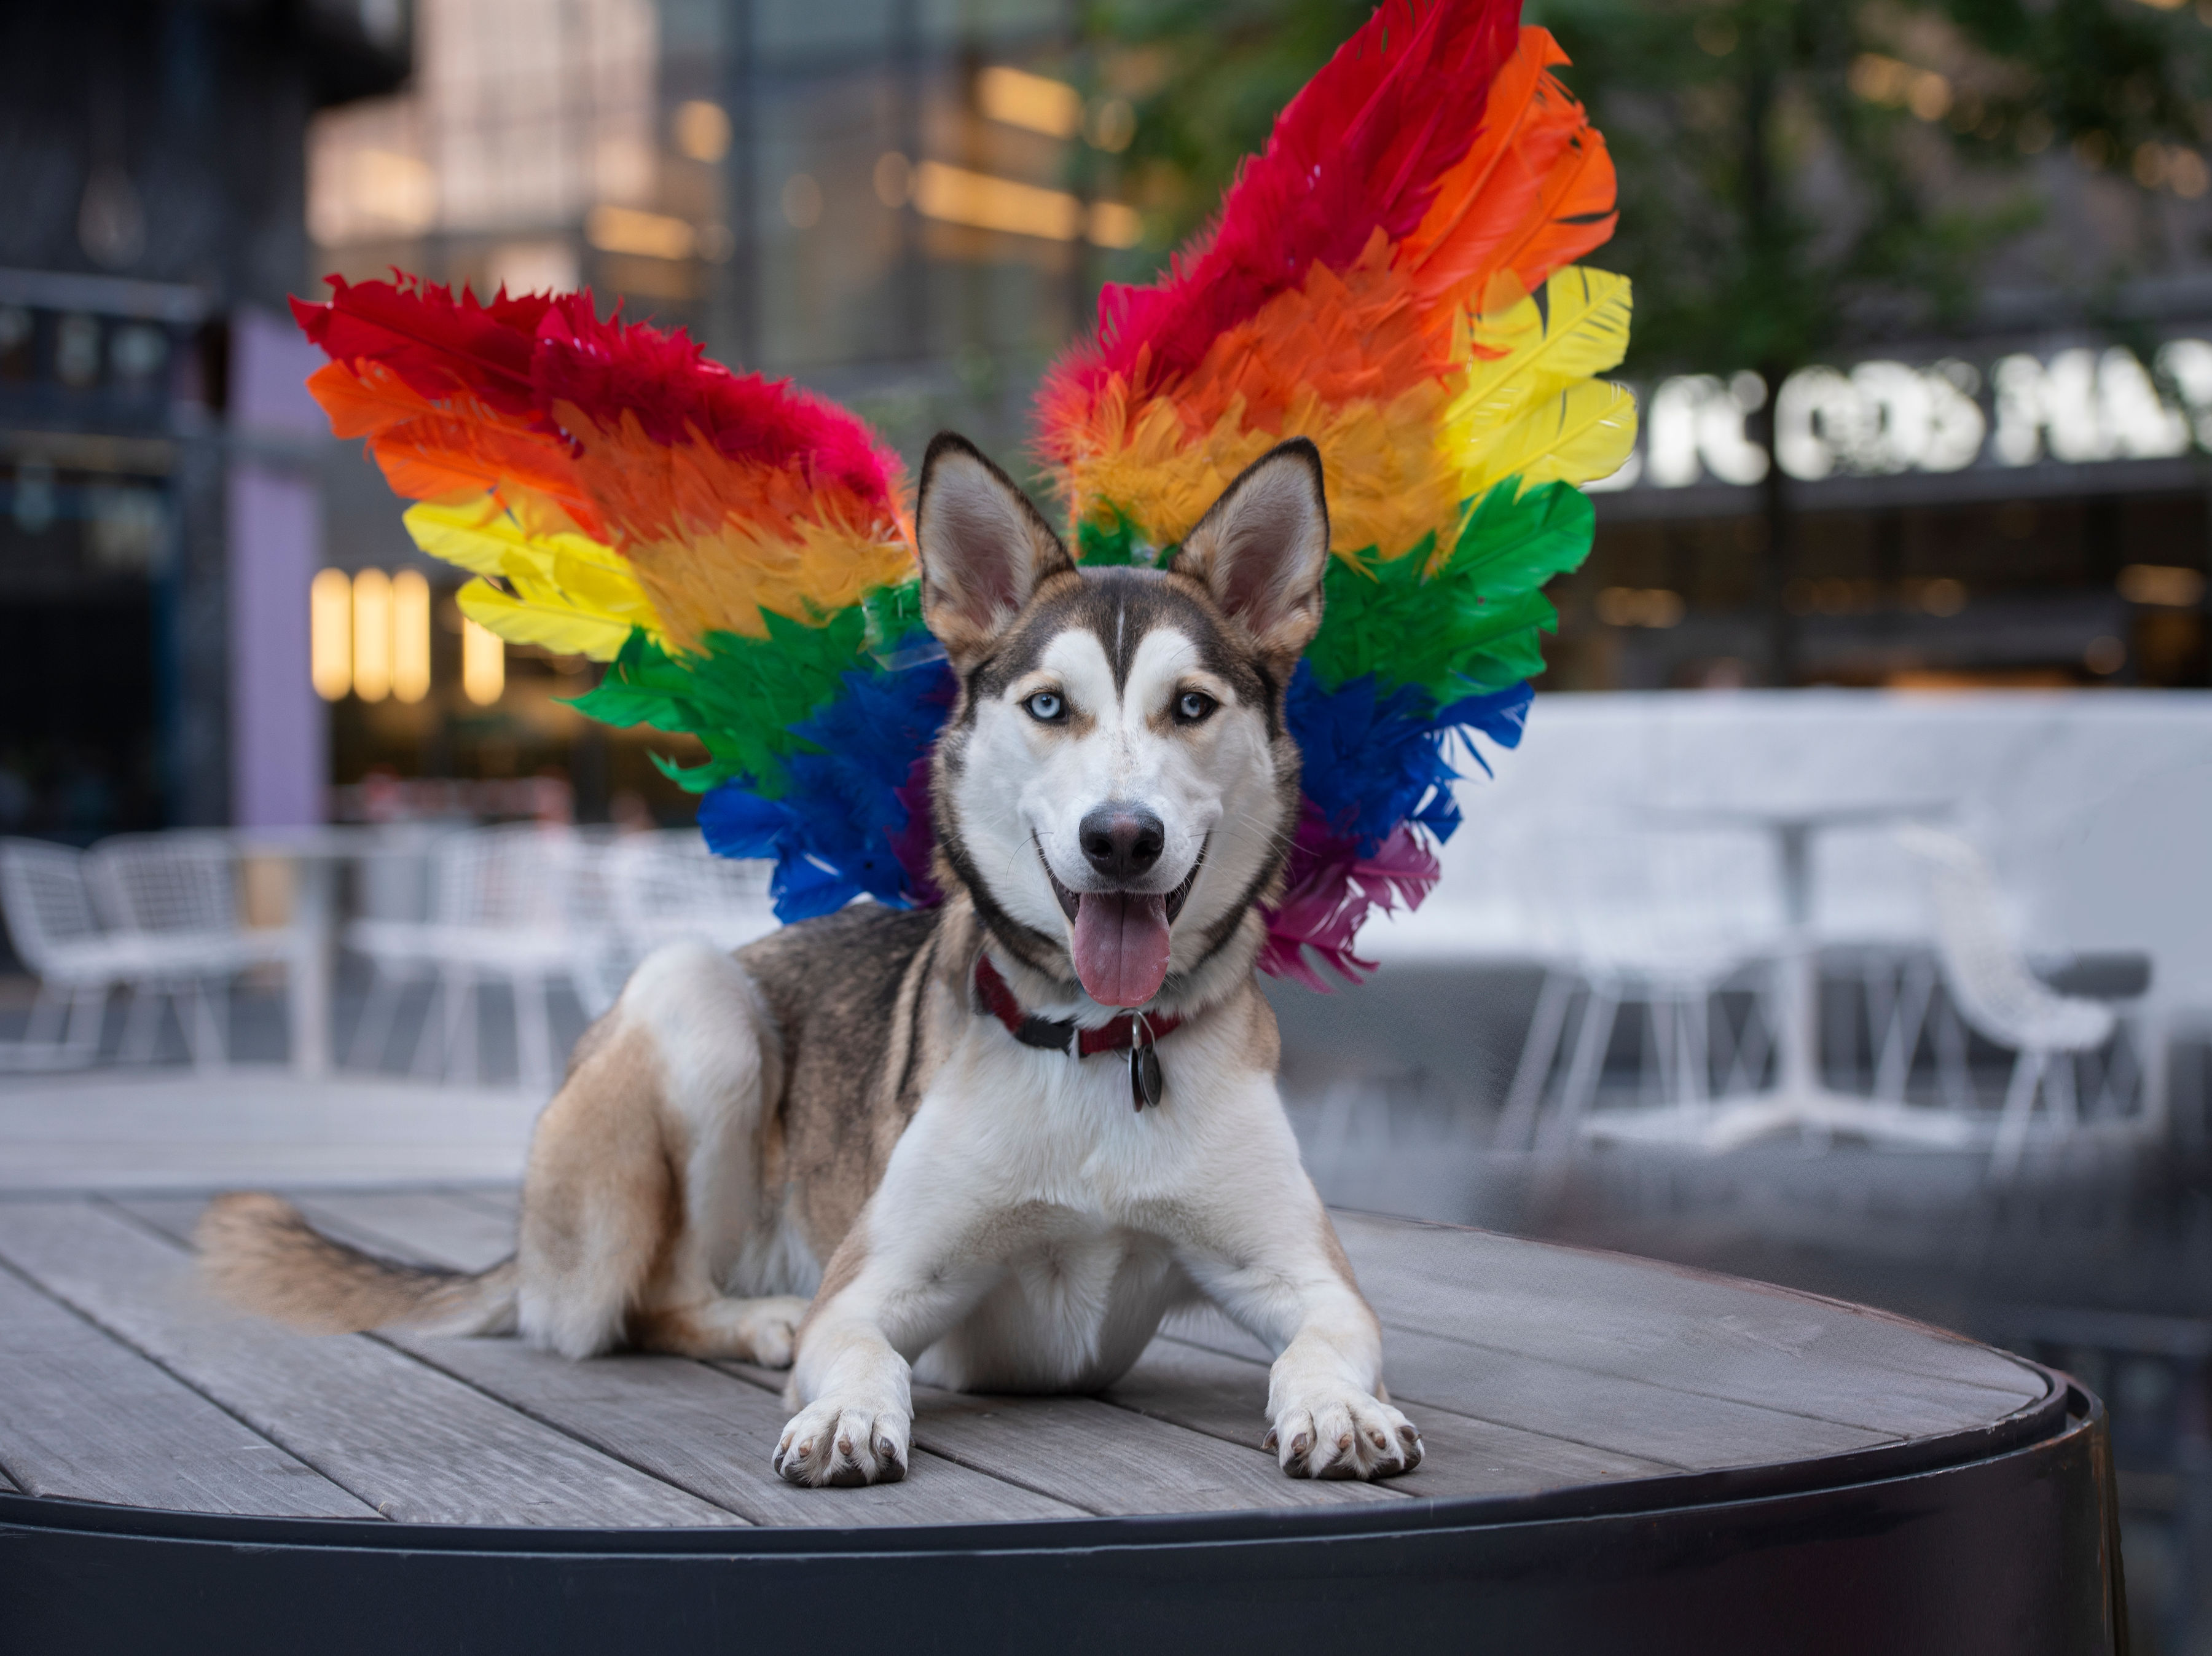 A dog in rainbow wings.